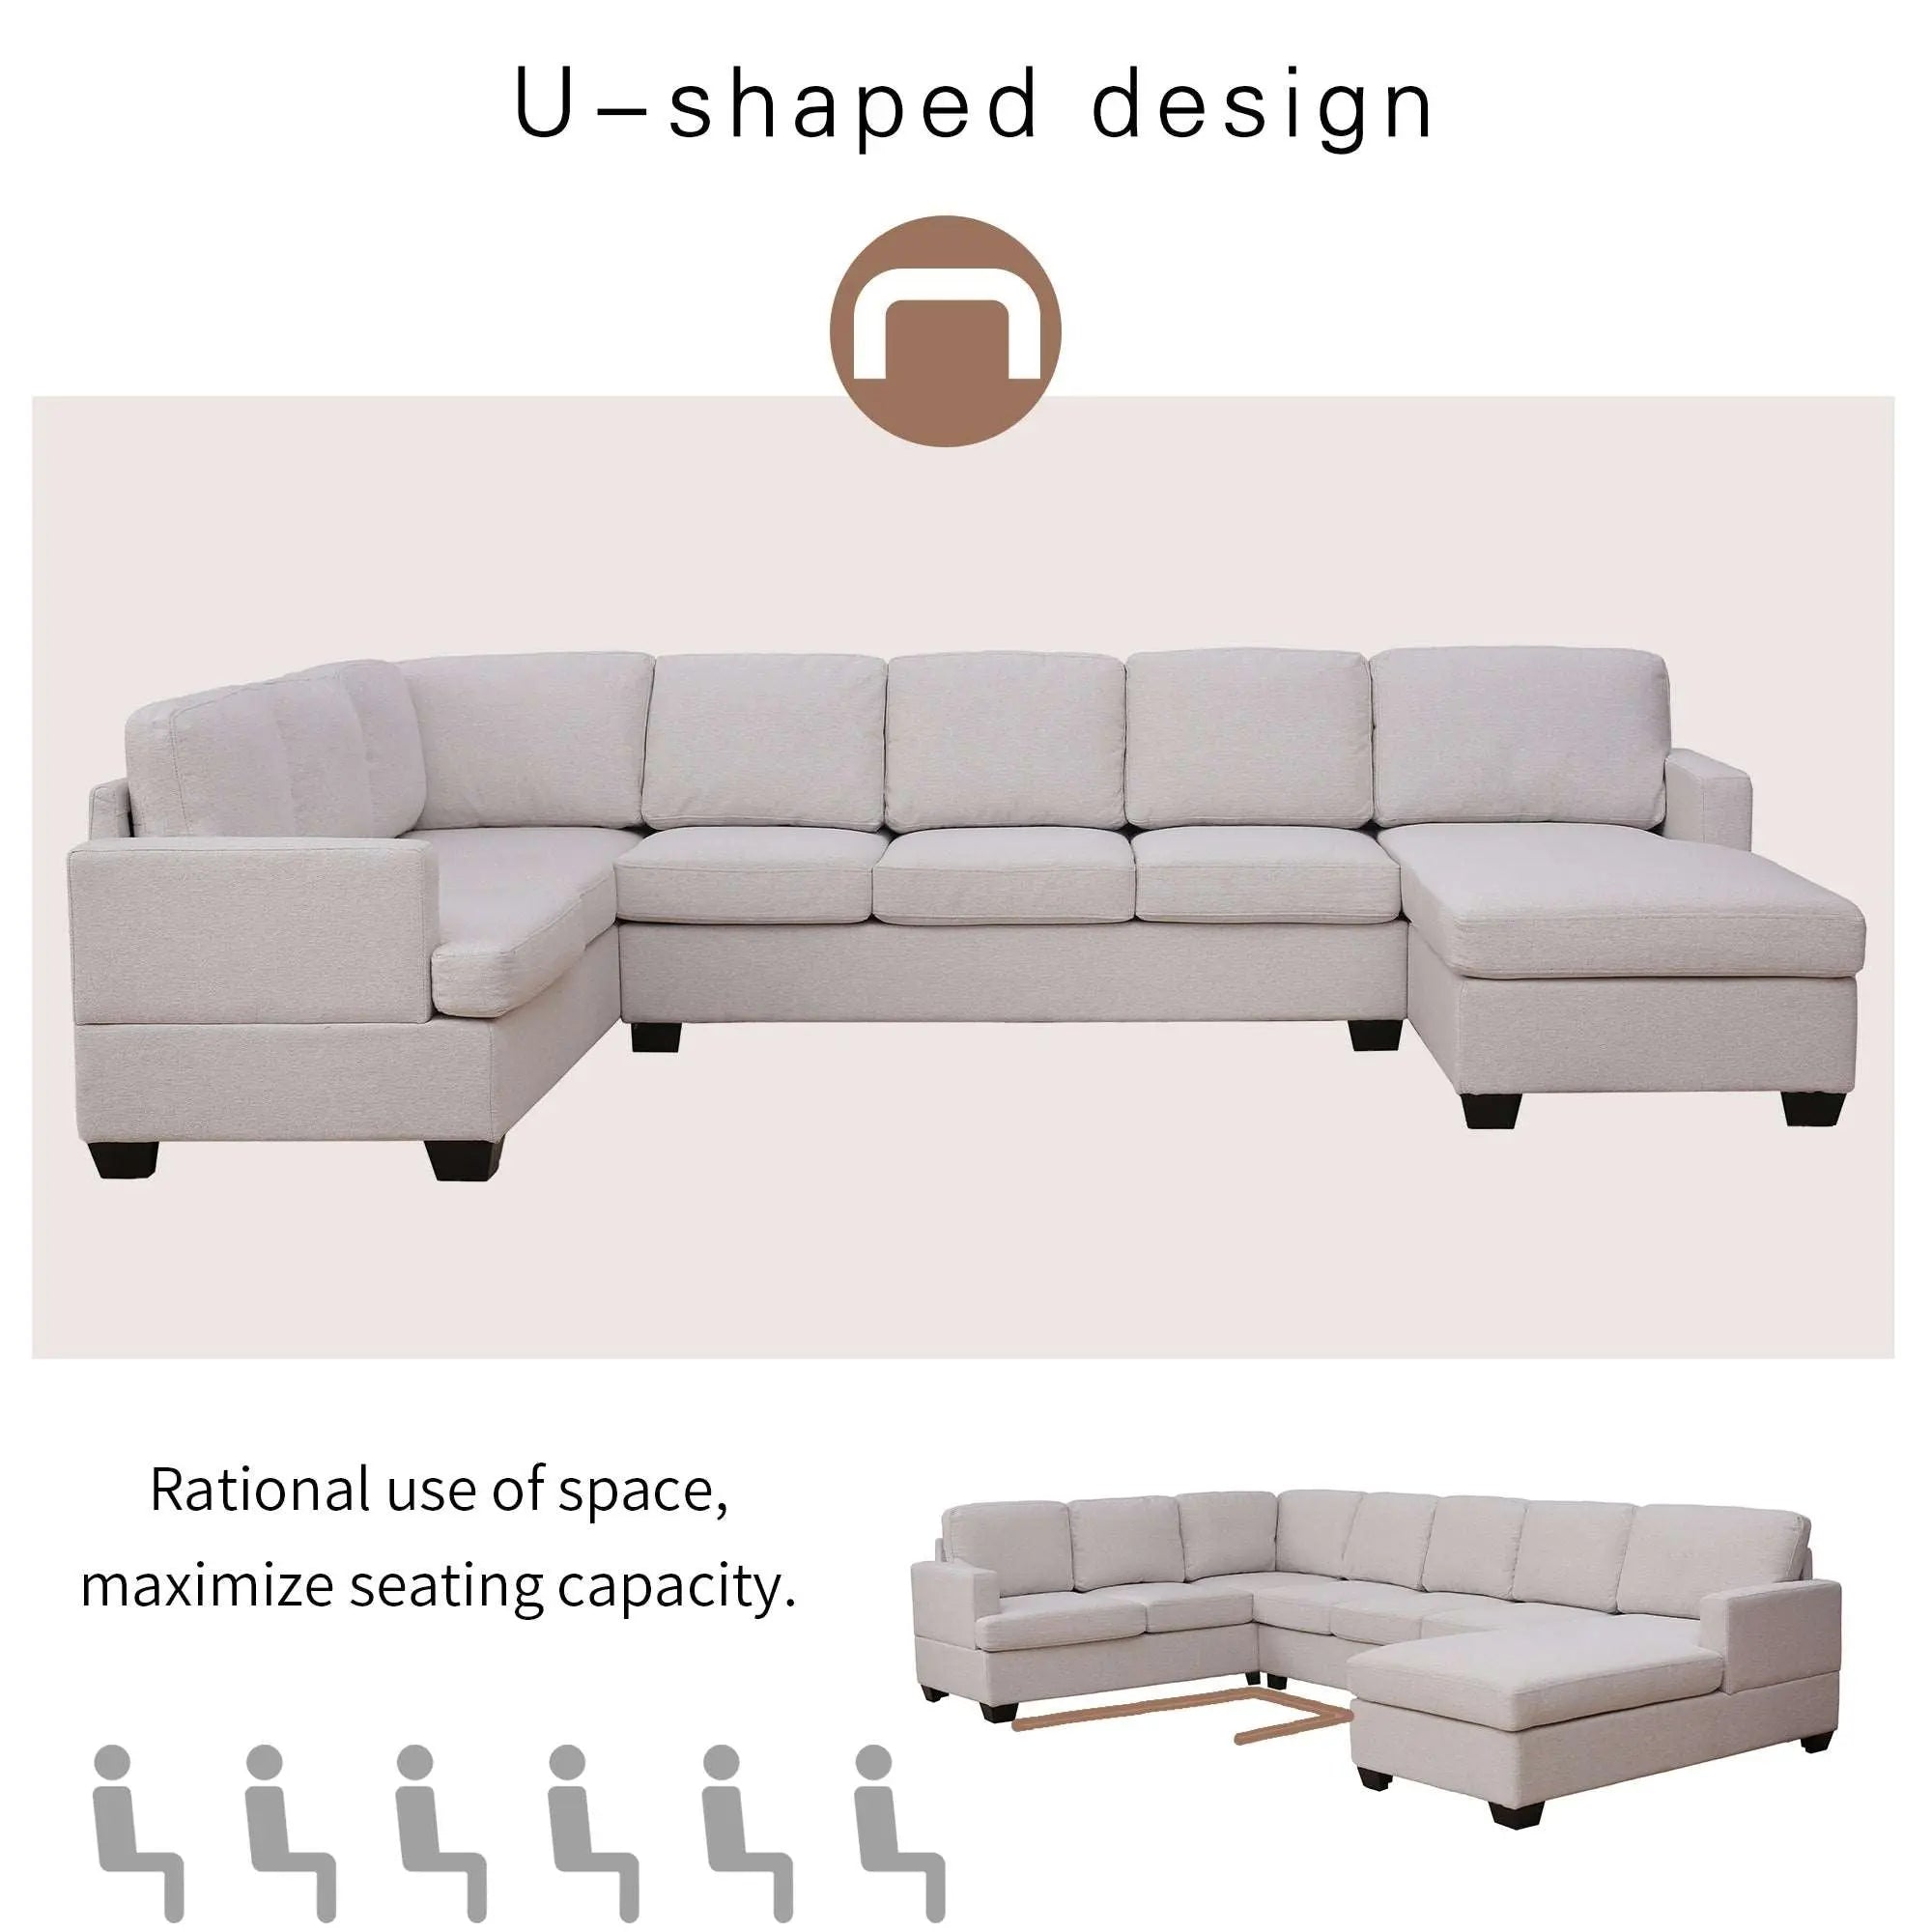 Bellemave 125.6" Modern Large Upholstered U-Shape Sectional Sofa, Extra Wide Chaise Lounge Couch